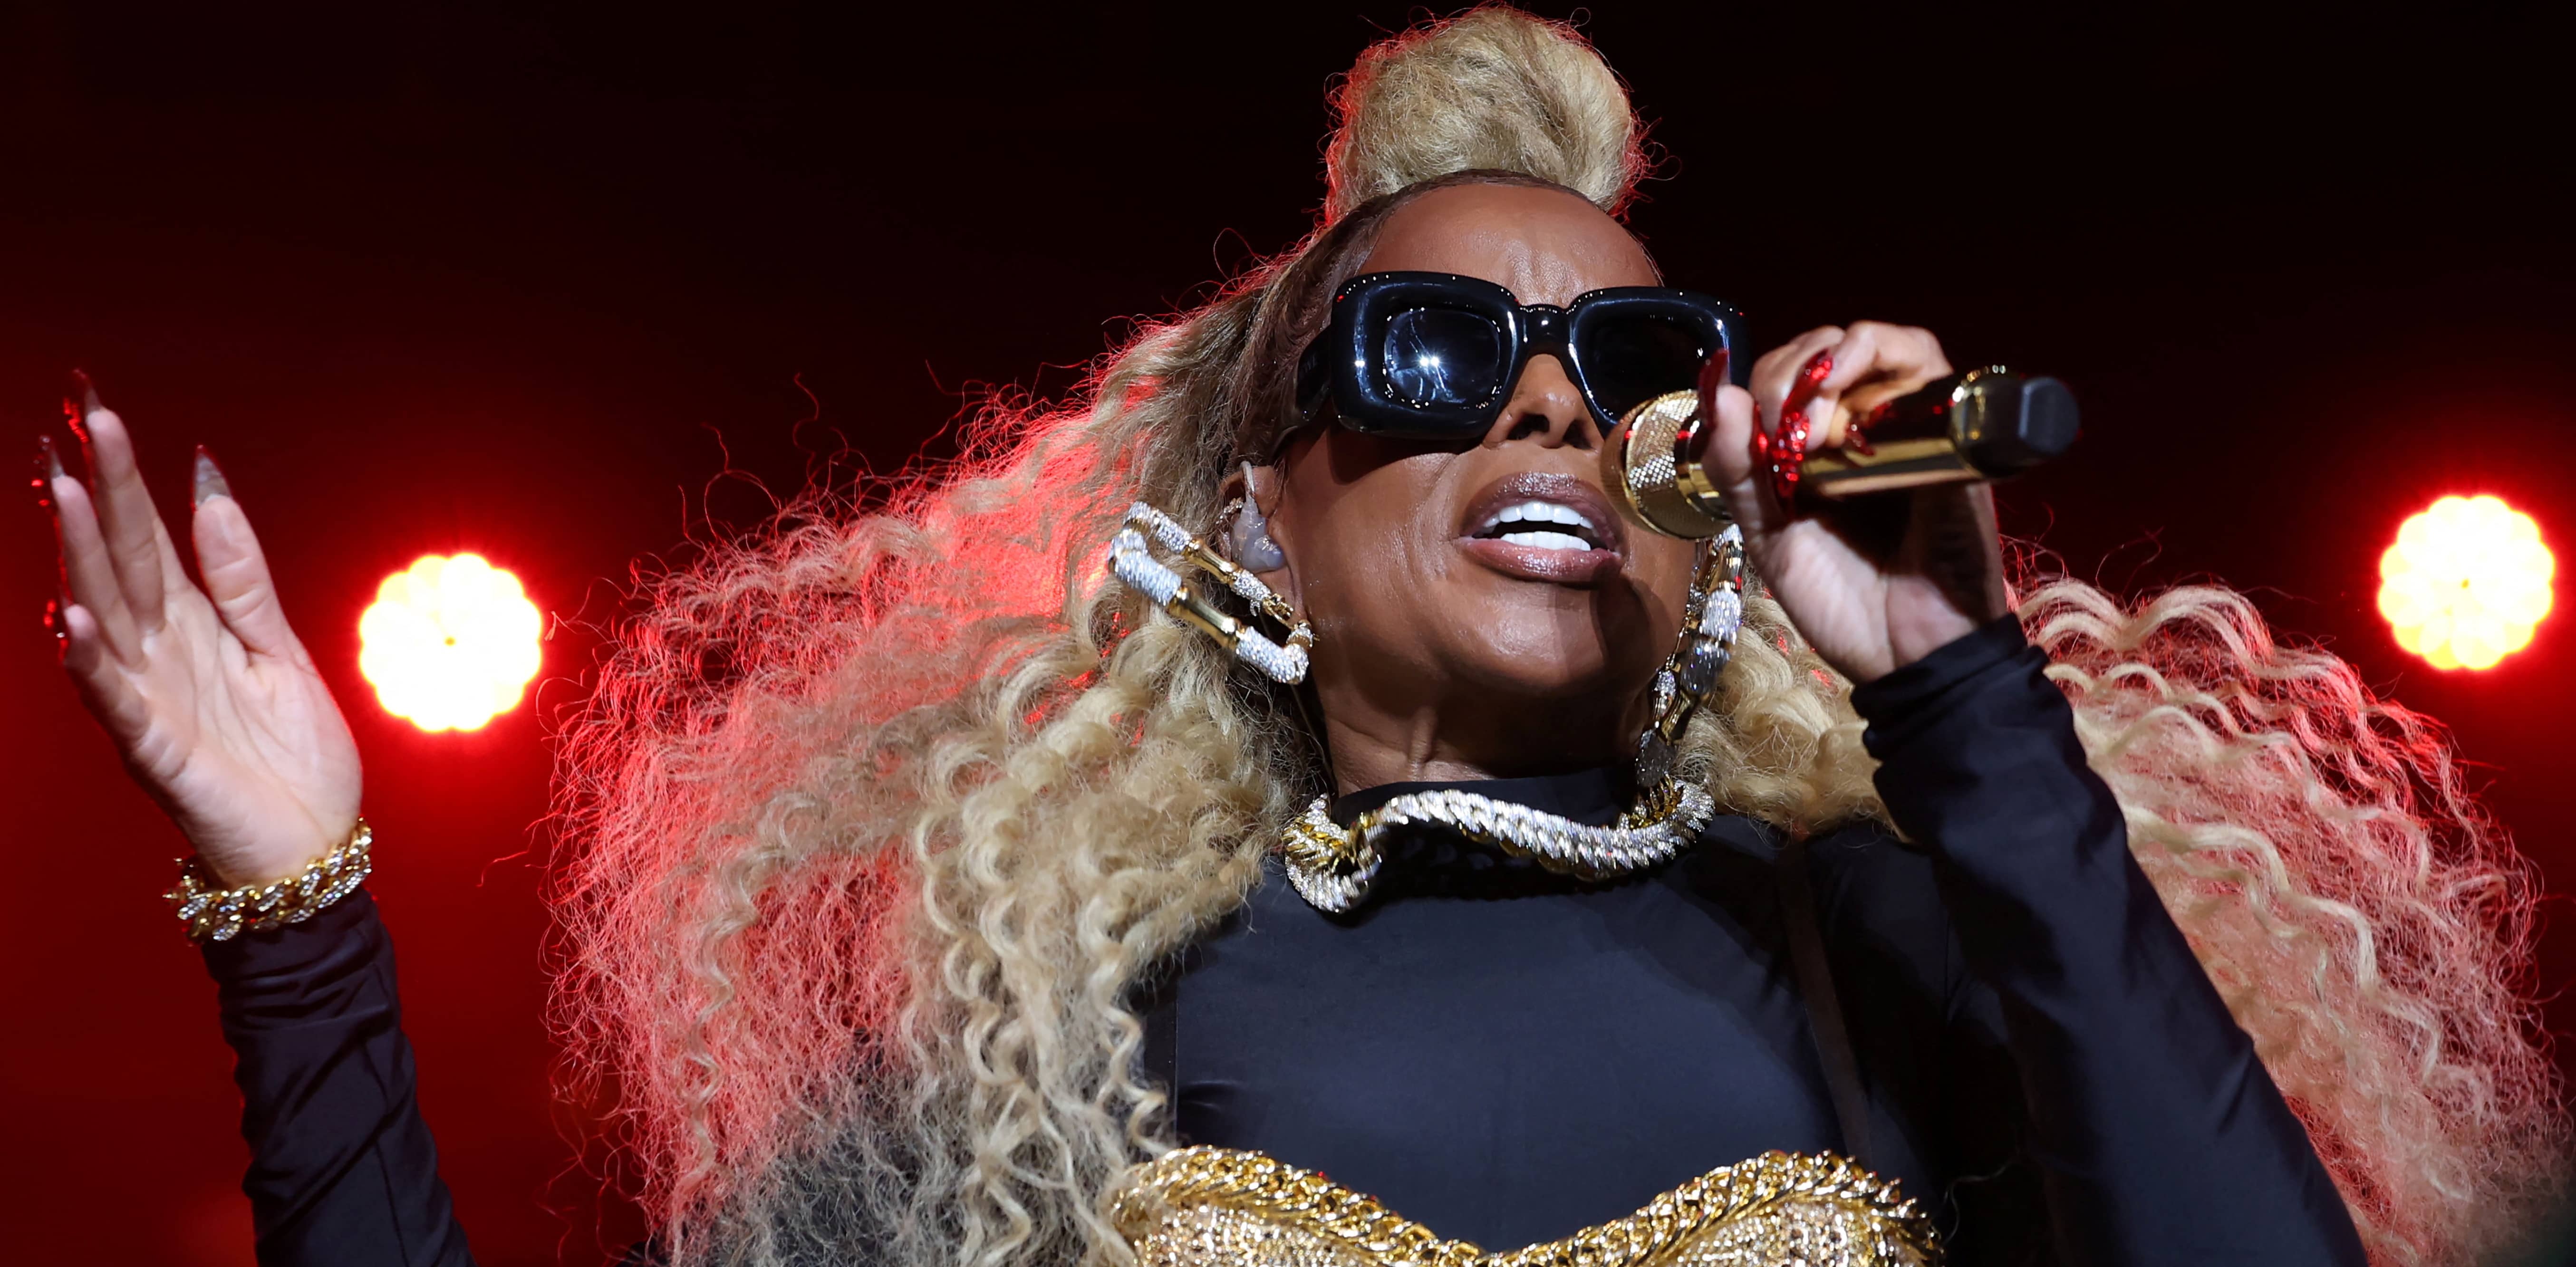 singer-mary-j-blige-performs-during-her-good-morning-gorgeous-tour-at-the-forum-in-inglewood